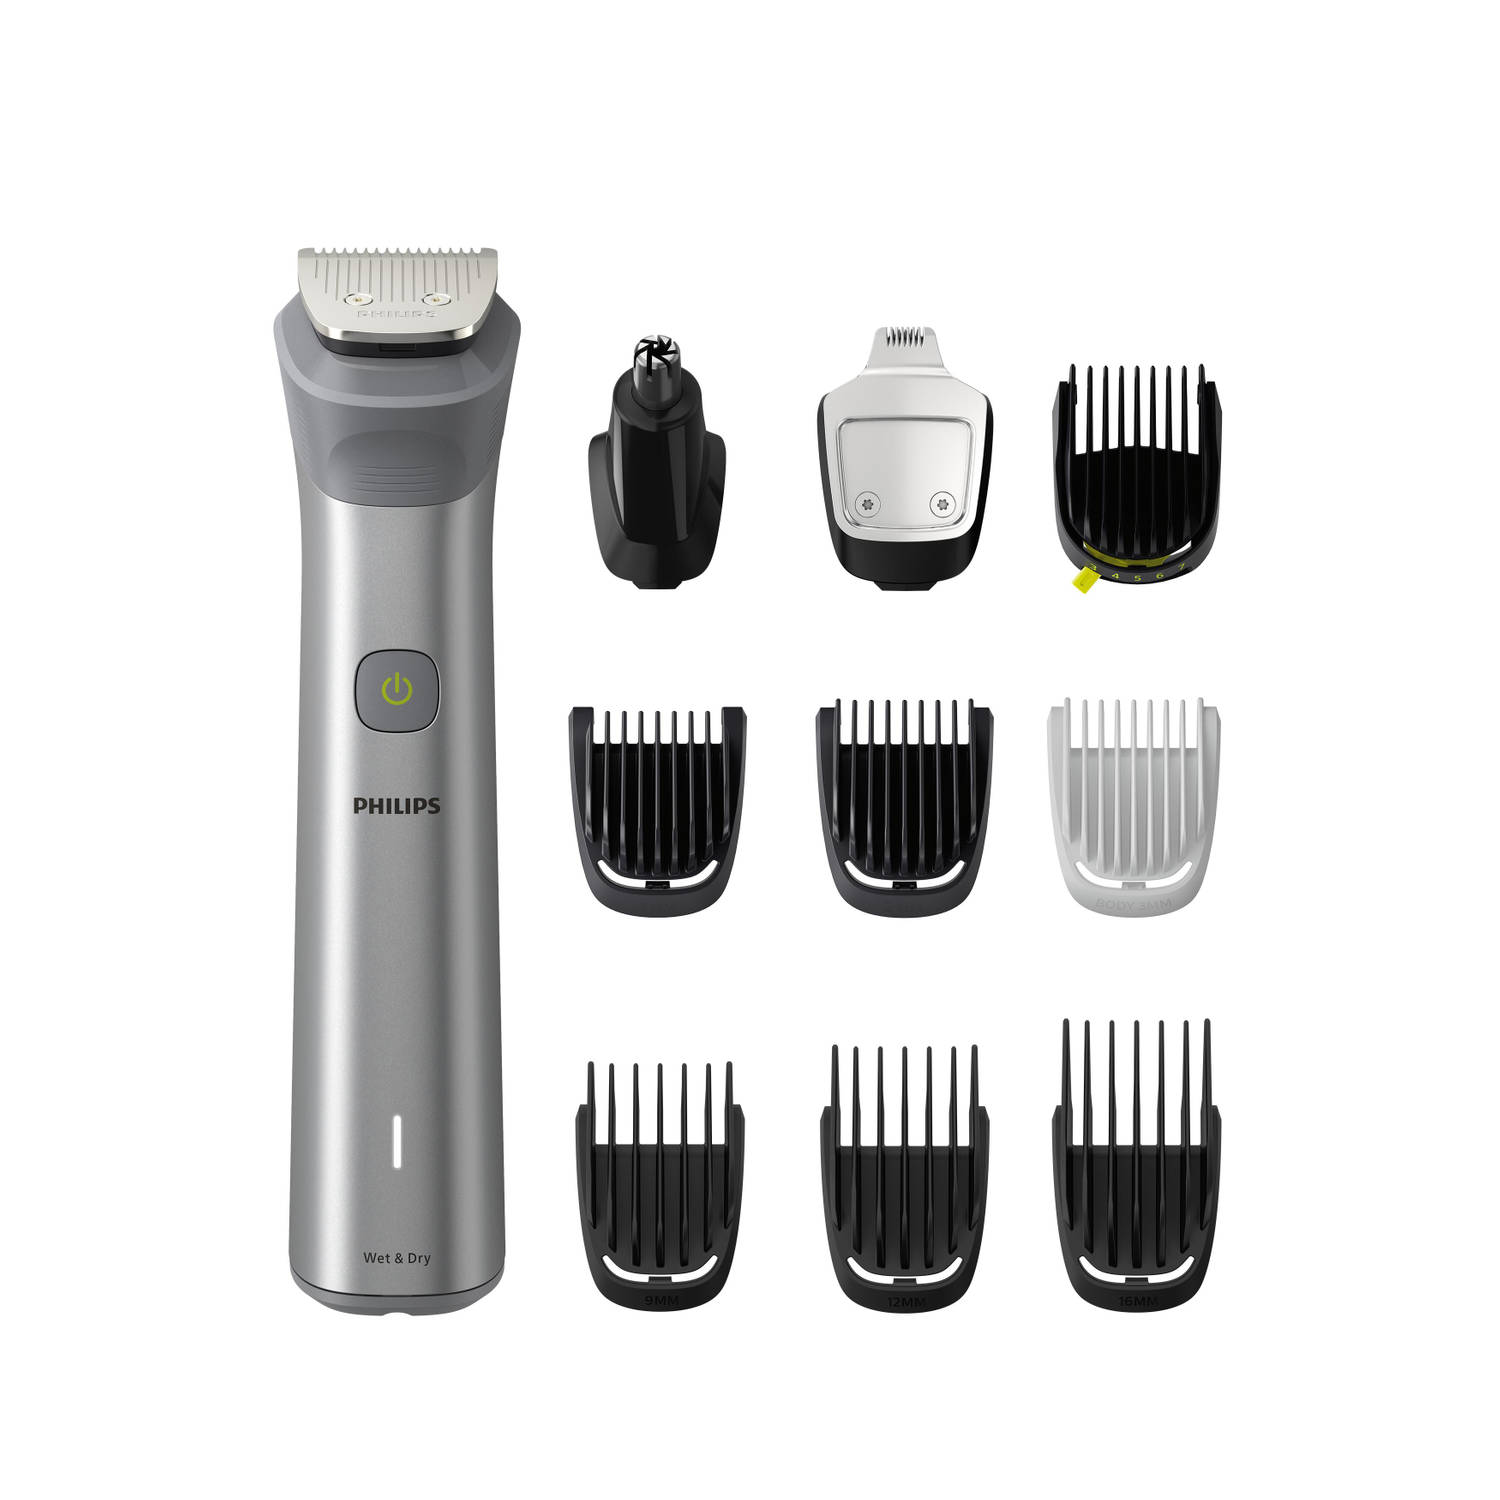 Philips all-in-one trimmer series 5000 MG5920-15 11 lengtestanden